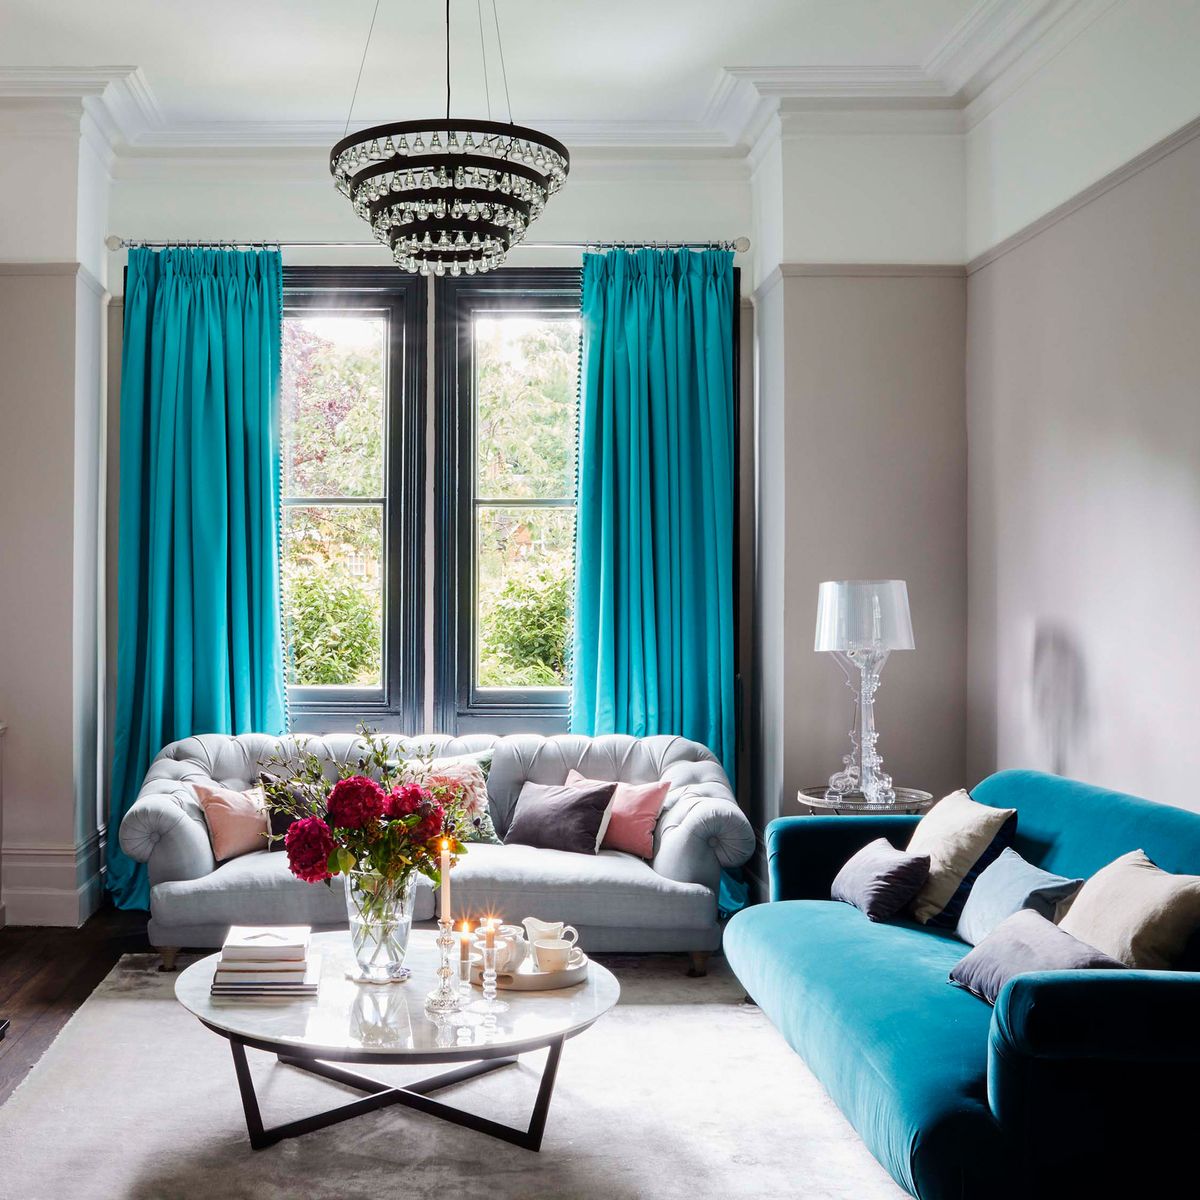 Blue and grey living room ideas for every style of home